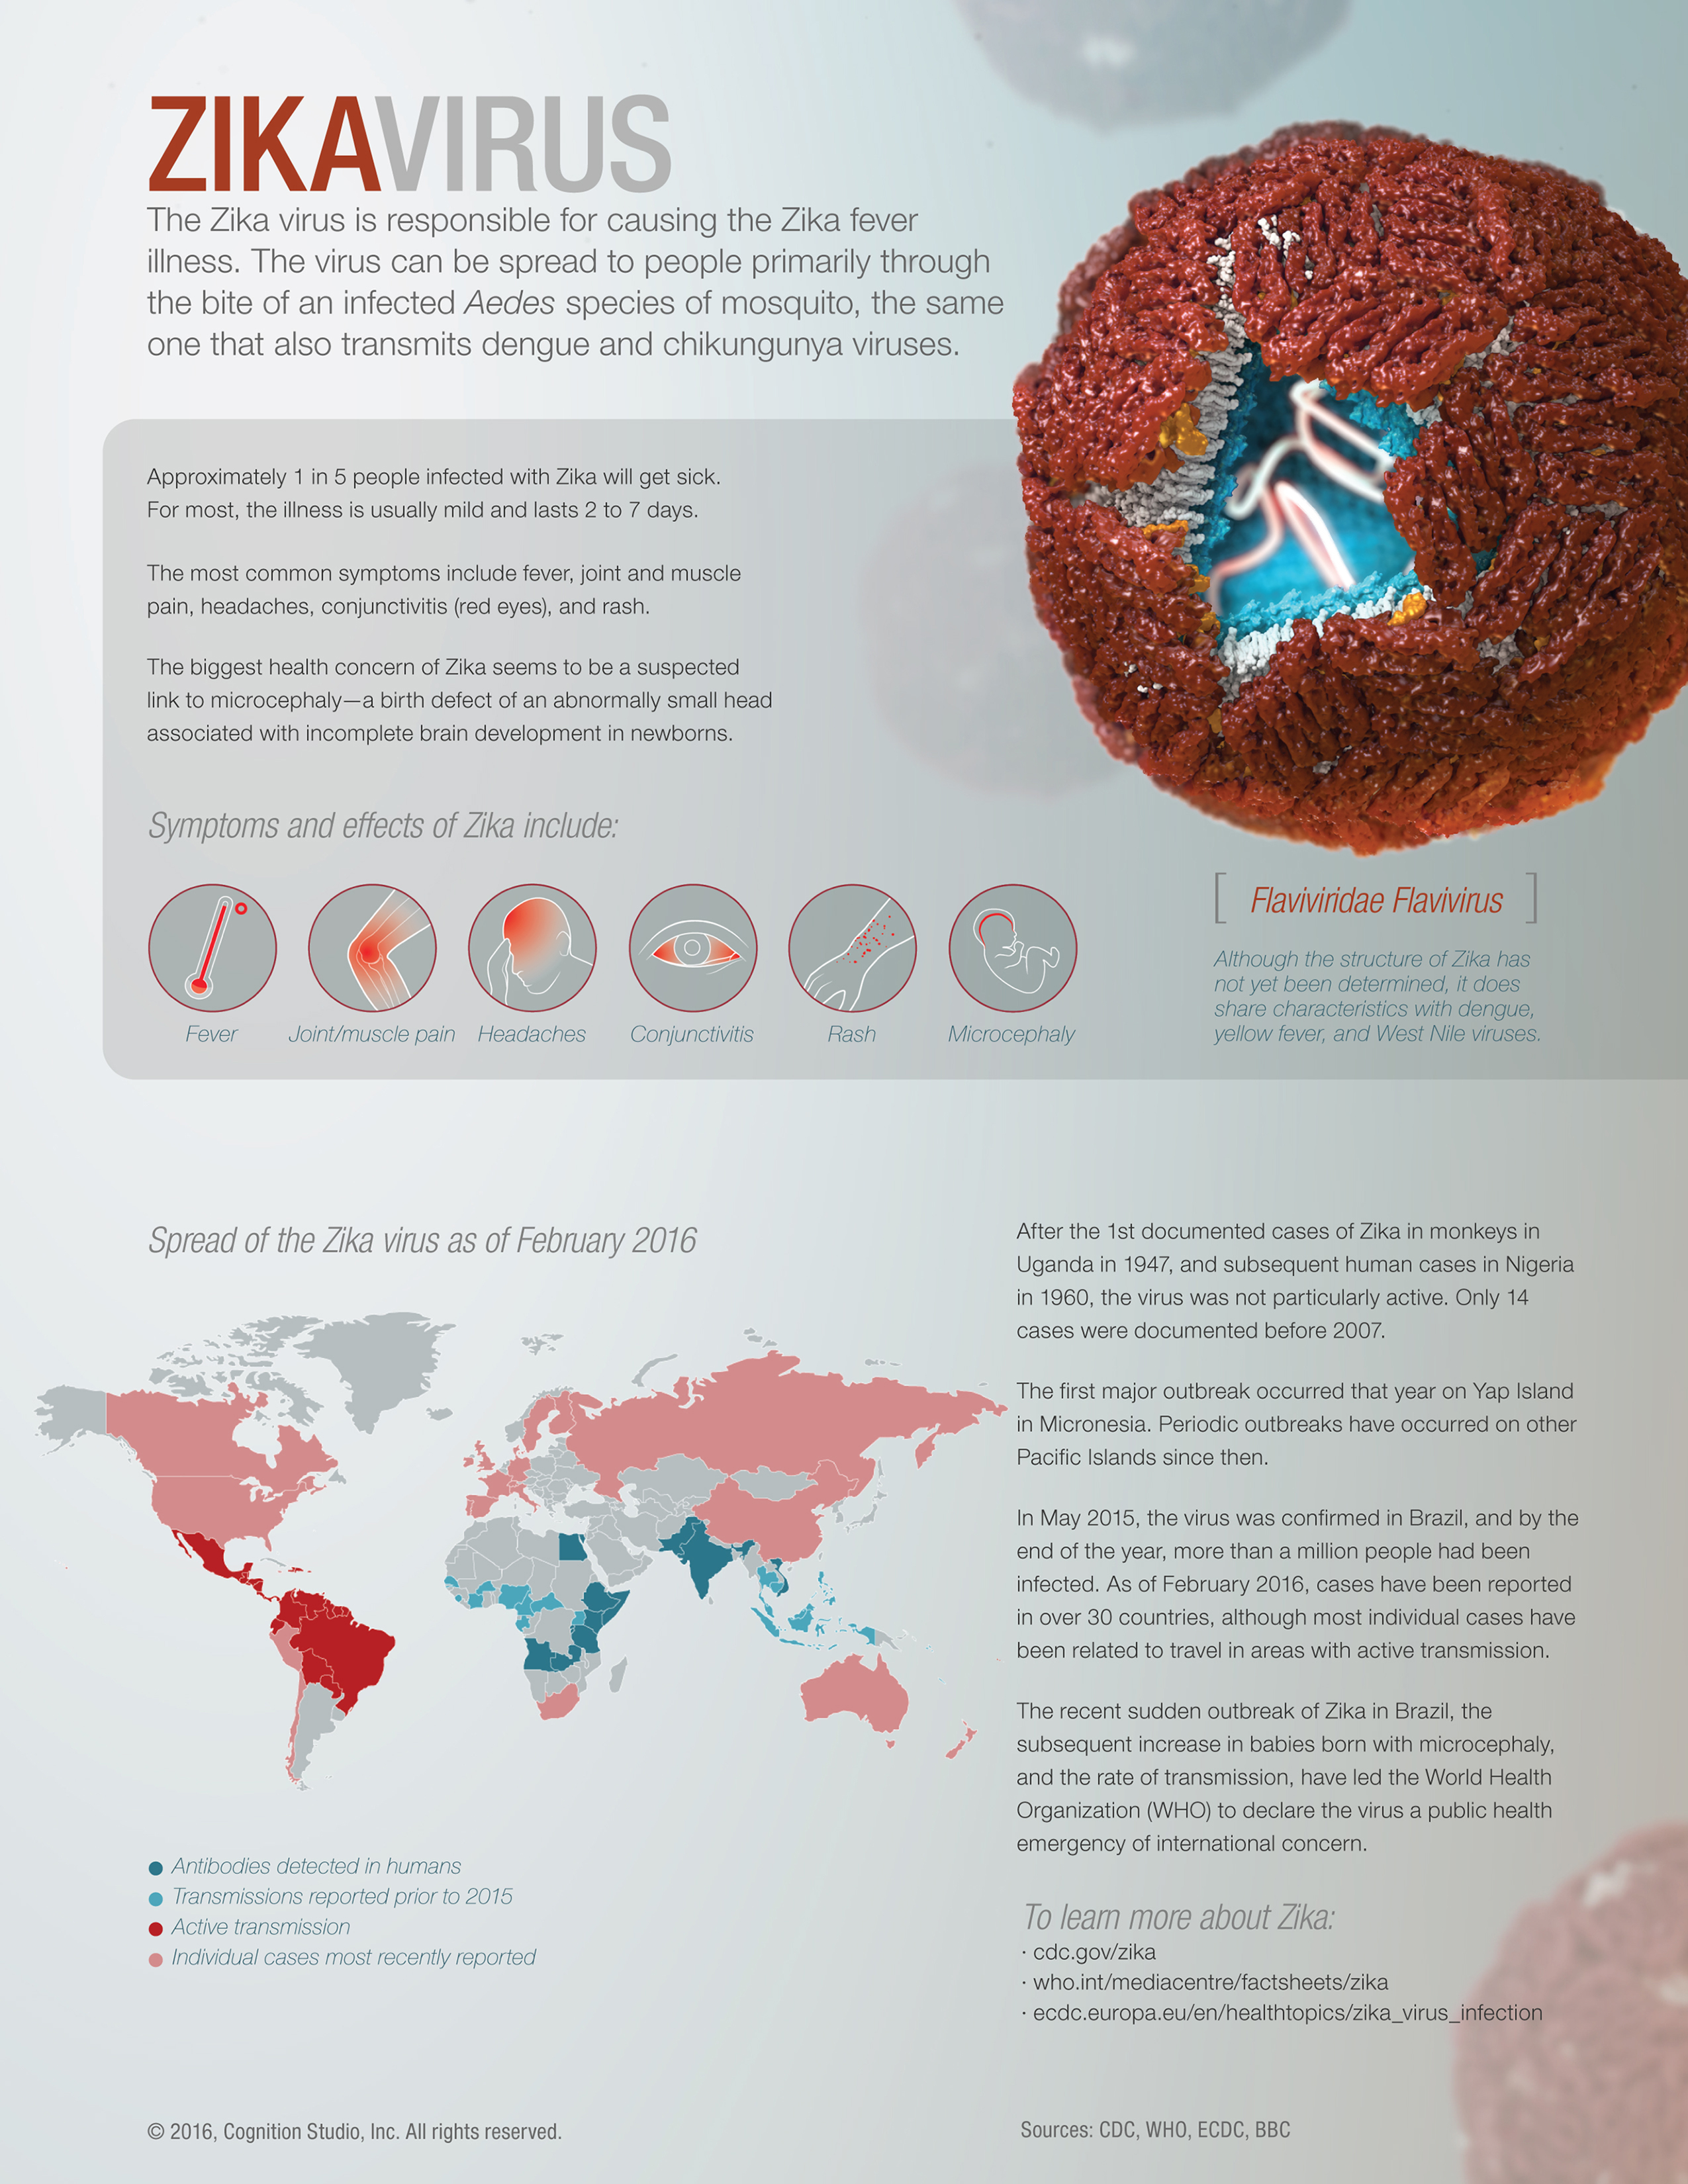 Visual layout provides information about the Zika virus and its transmission, as well as iconography for symptoms and a 3D high quality proposed model of the Zika virus.